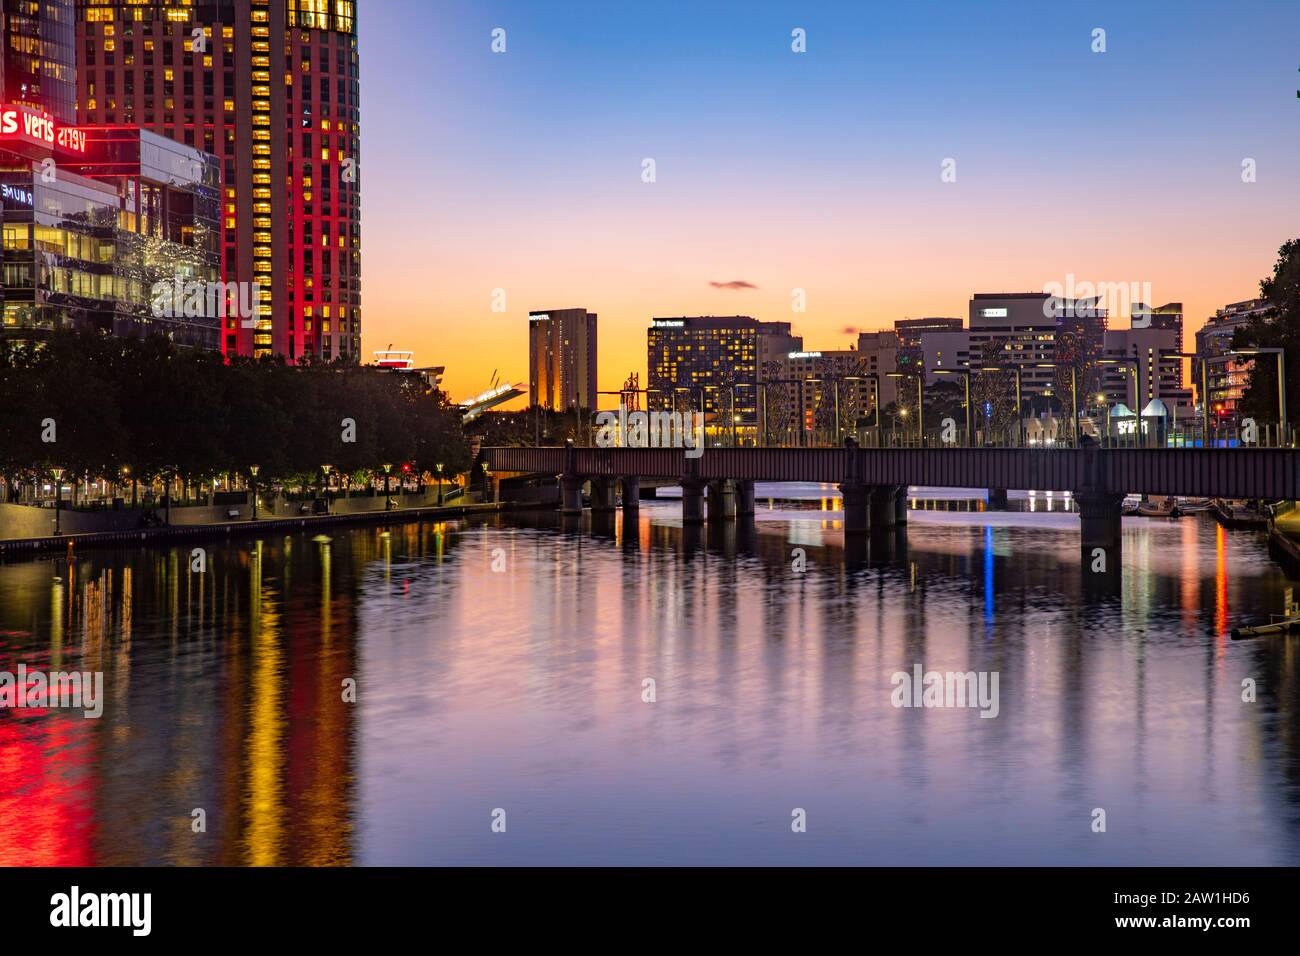 Yarra river and Melbourne city centre at night time,Melbourne,Australia Stock Photo